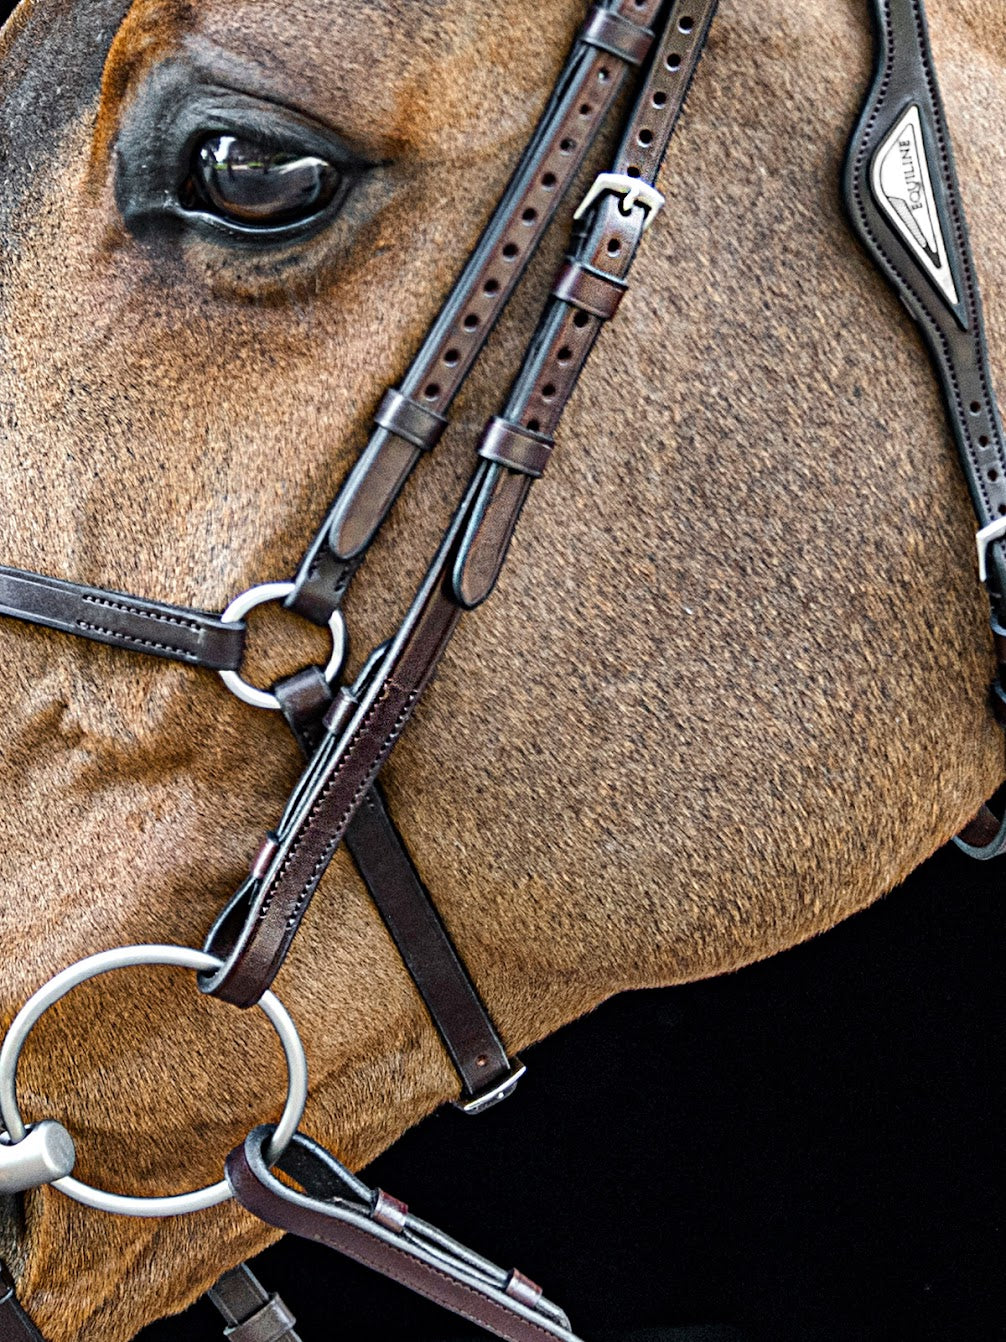 The Equiline cheek pieces with bullet pin fastening are available in black or brown and finished in beautiful, supple Italian leather.